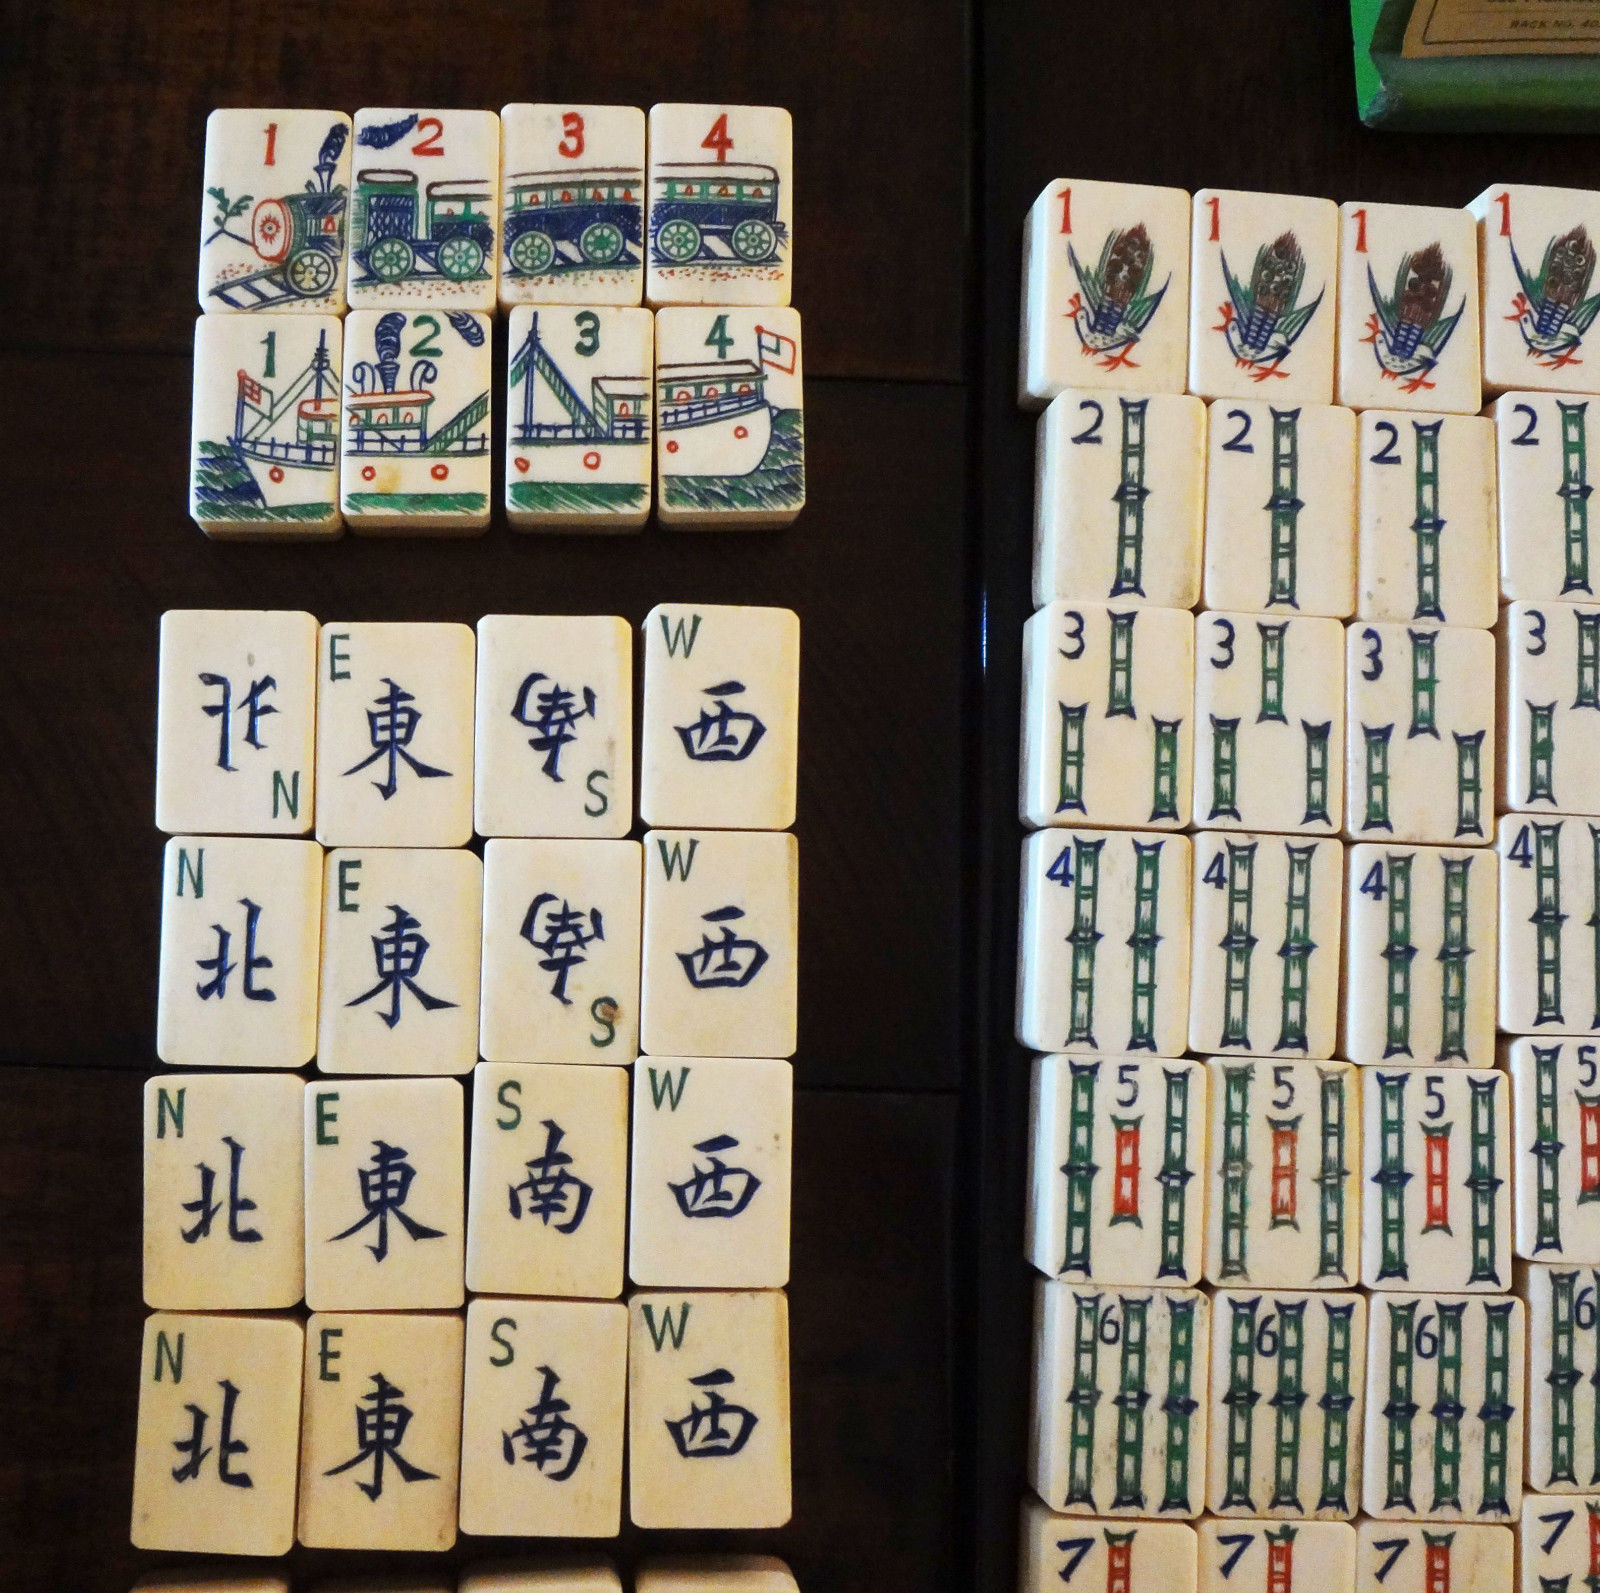 6 Mahjong Sets To Buy If You're Interested In Celebrating Its Rich History